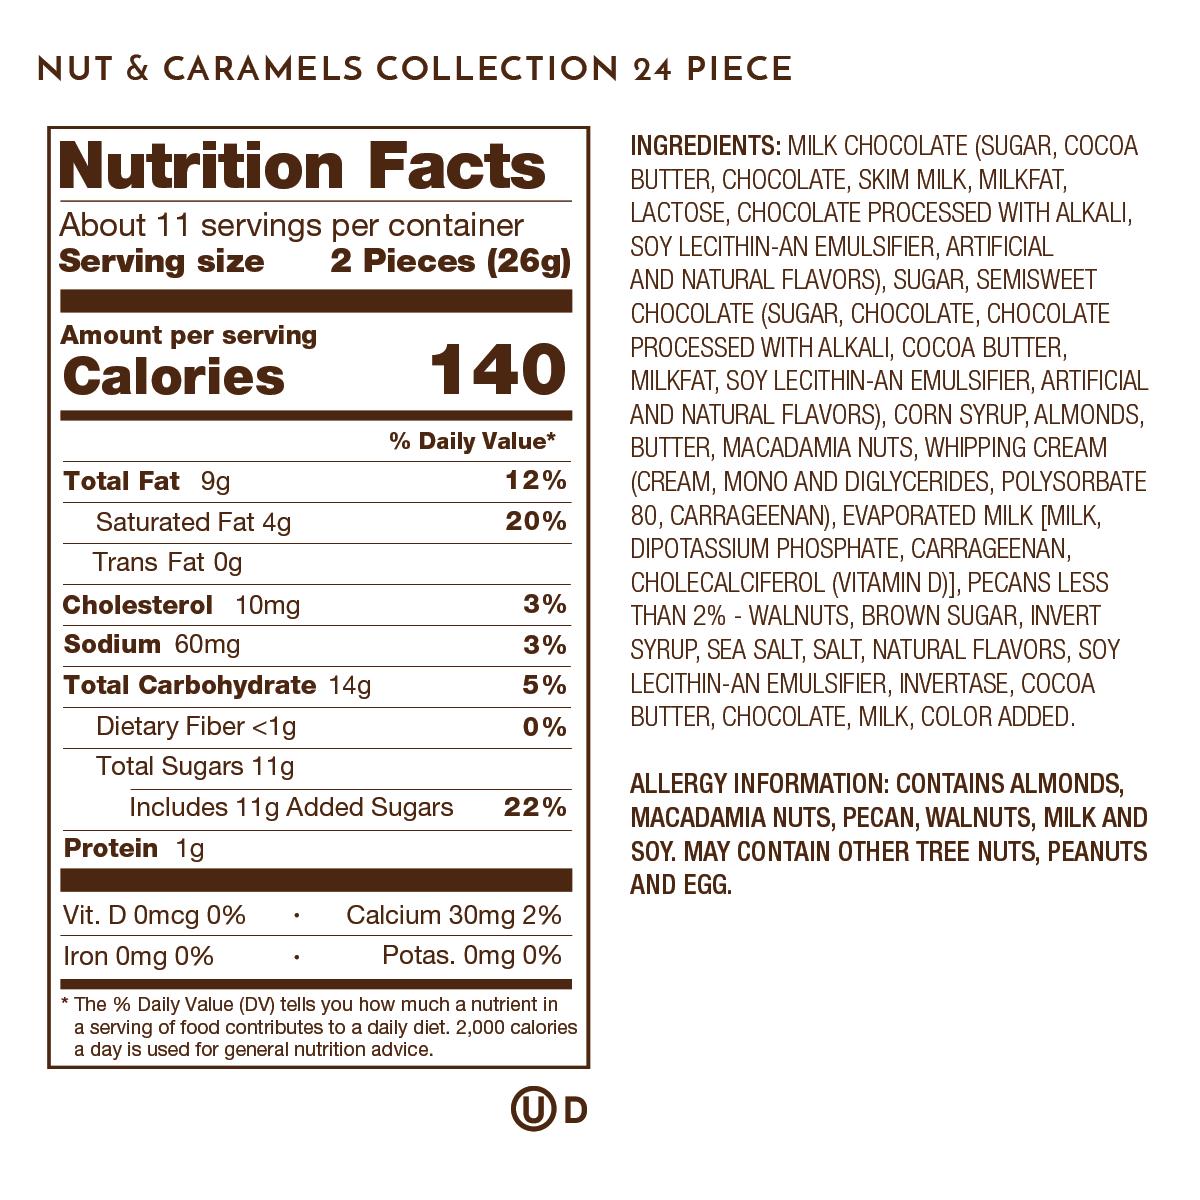 24 piece nuts and caramels nutrition facts and ingredients